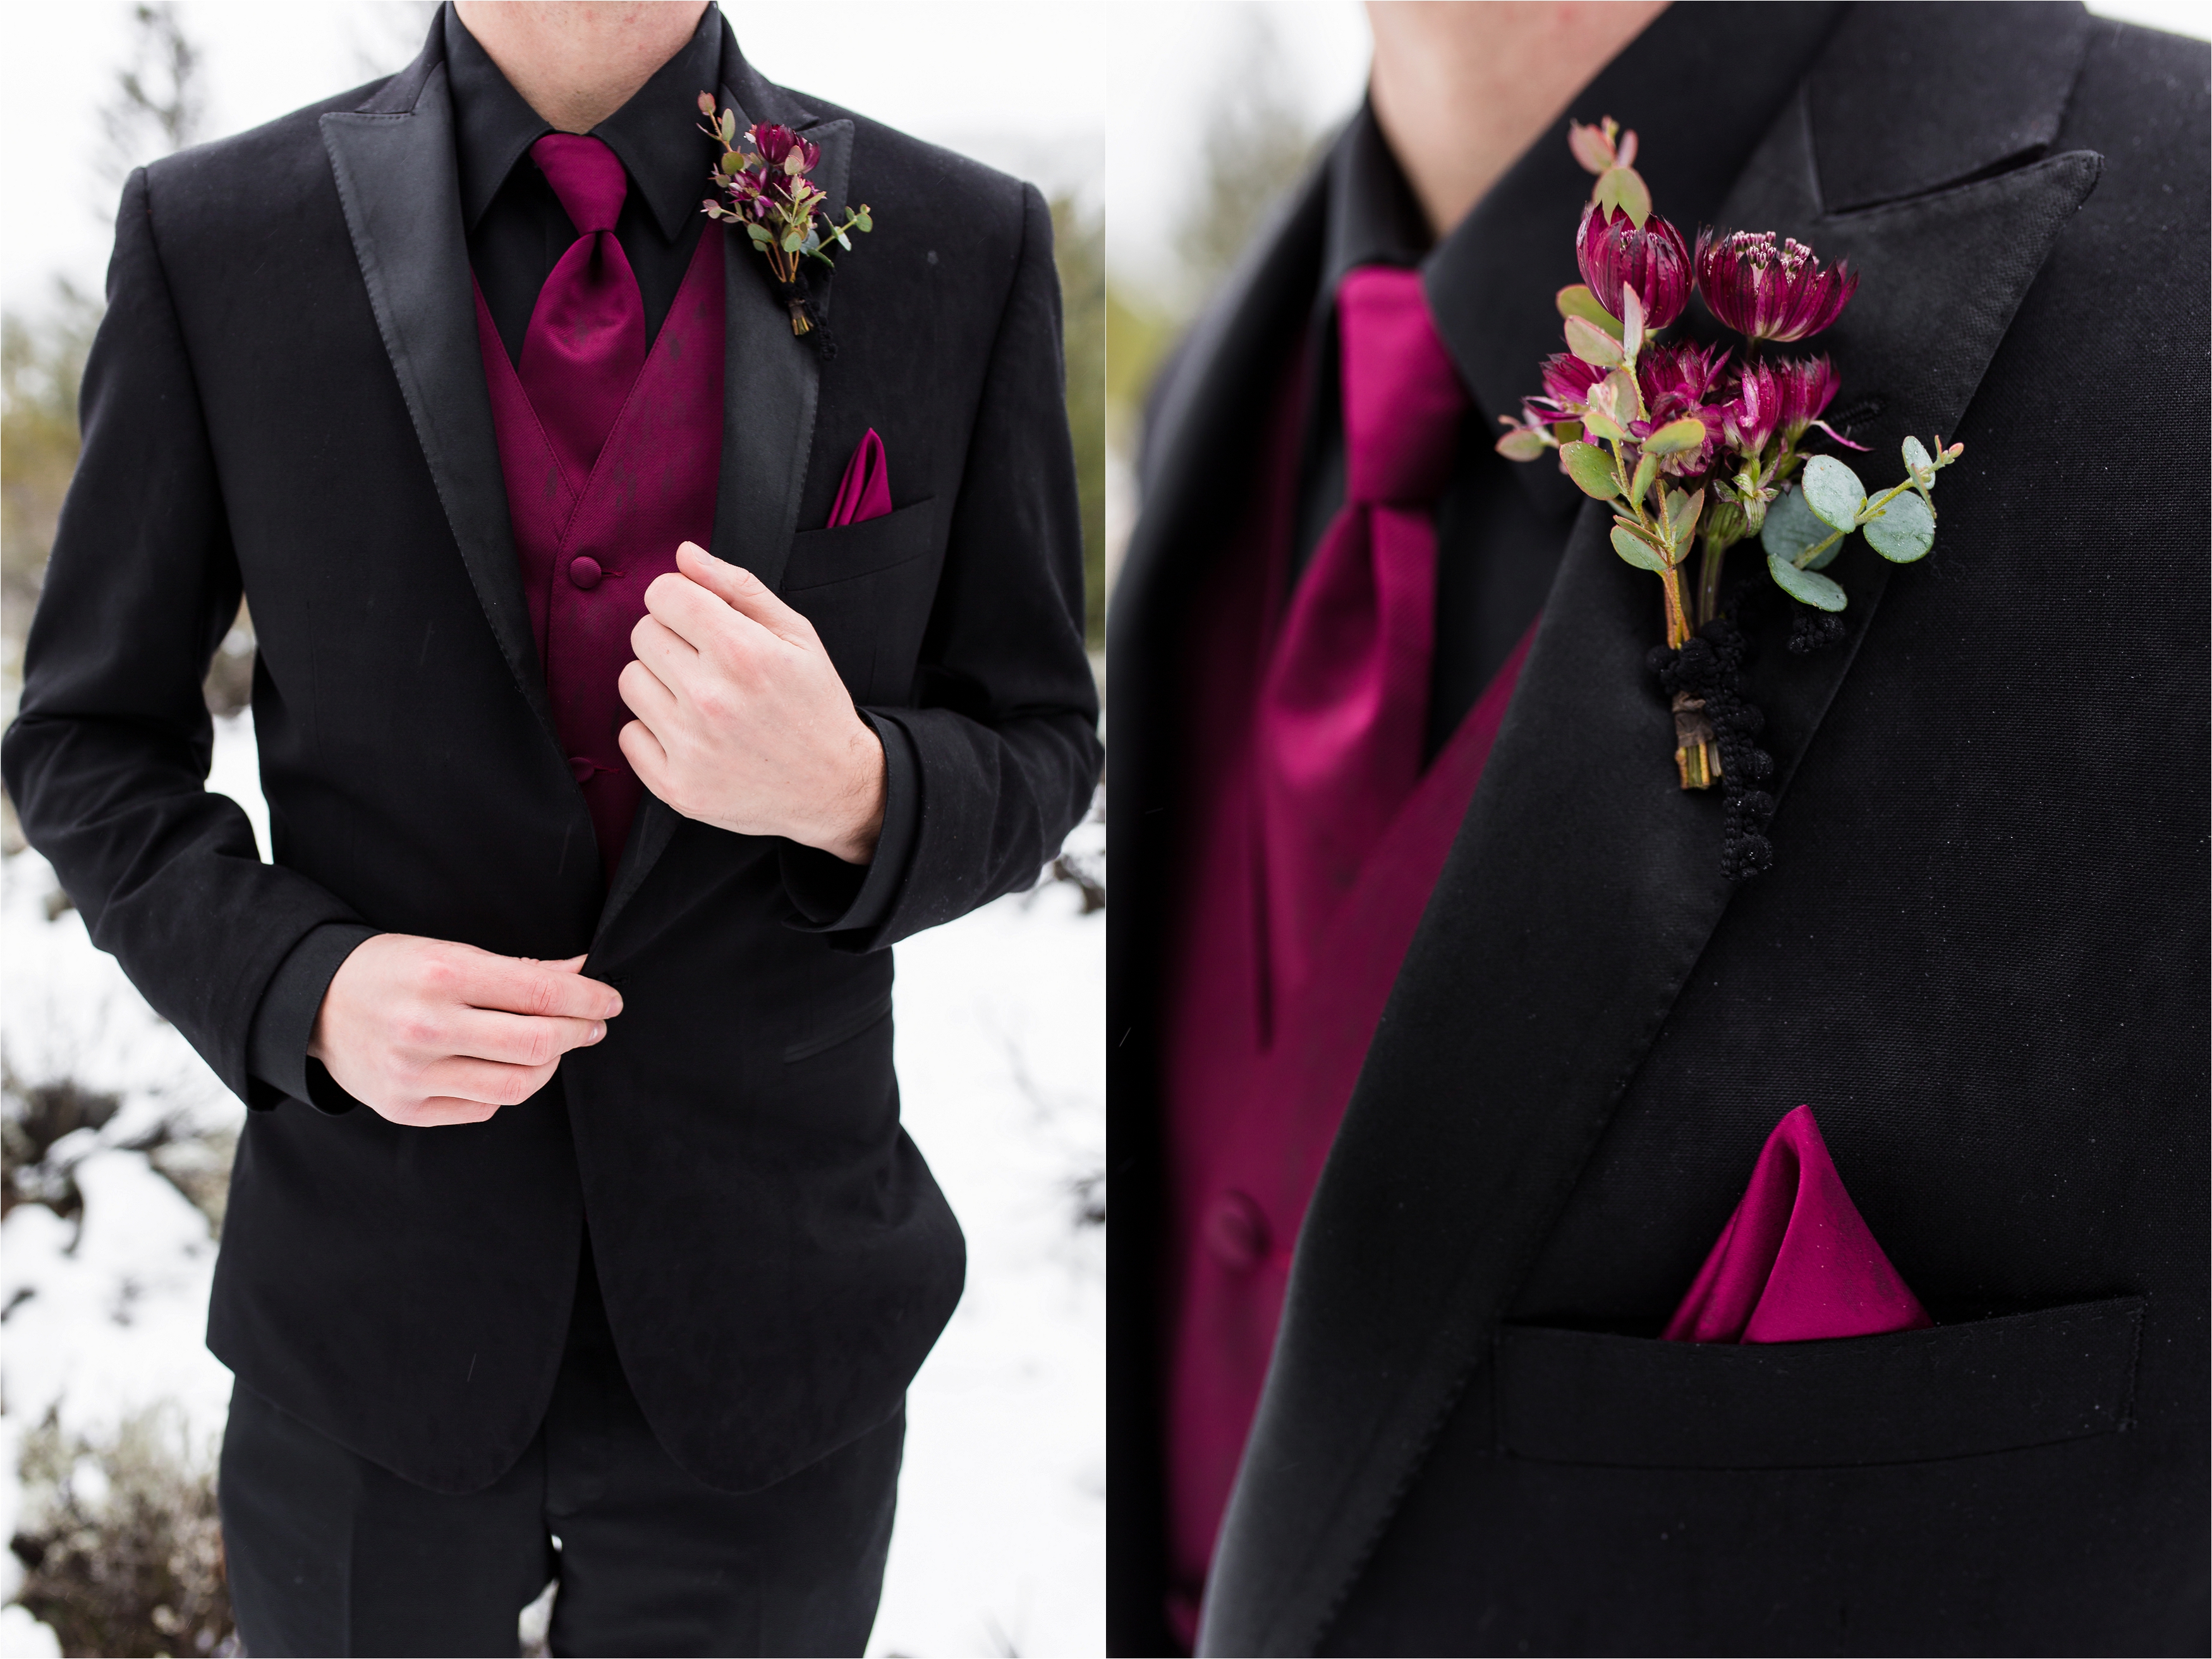 Black tuxedo with burgundy vest, tie, pocket square and boutonniere 